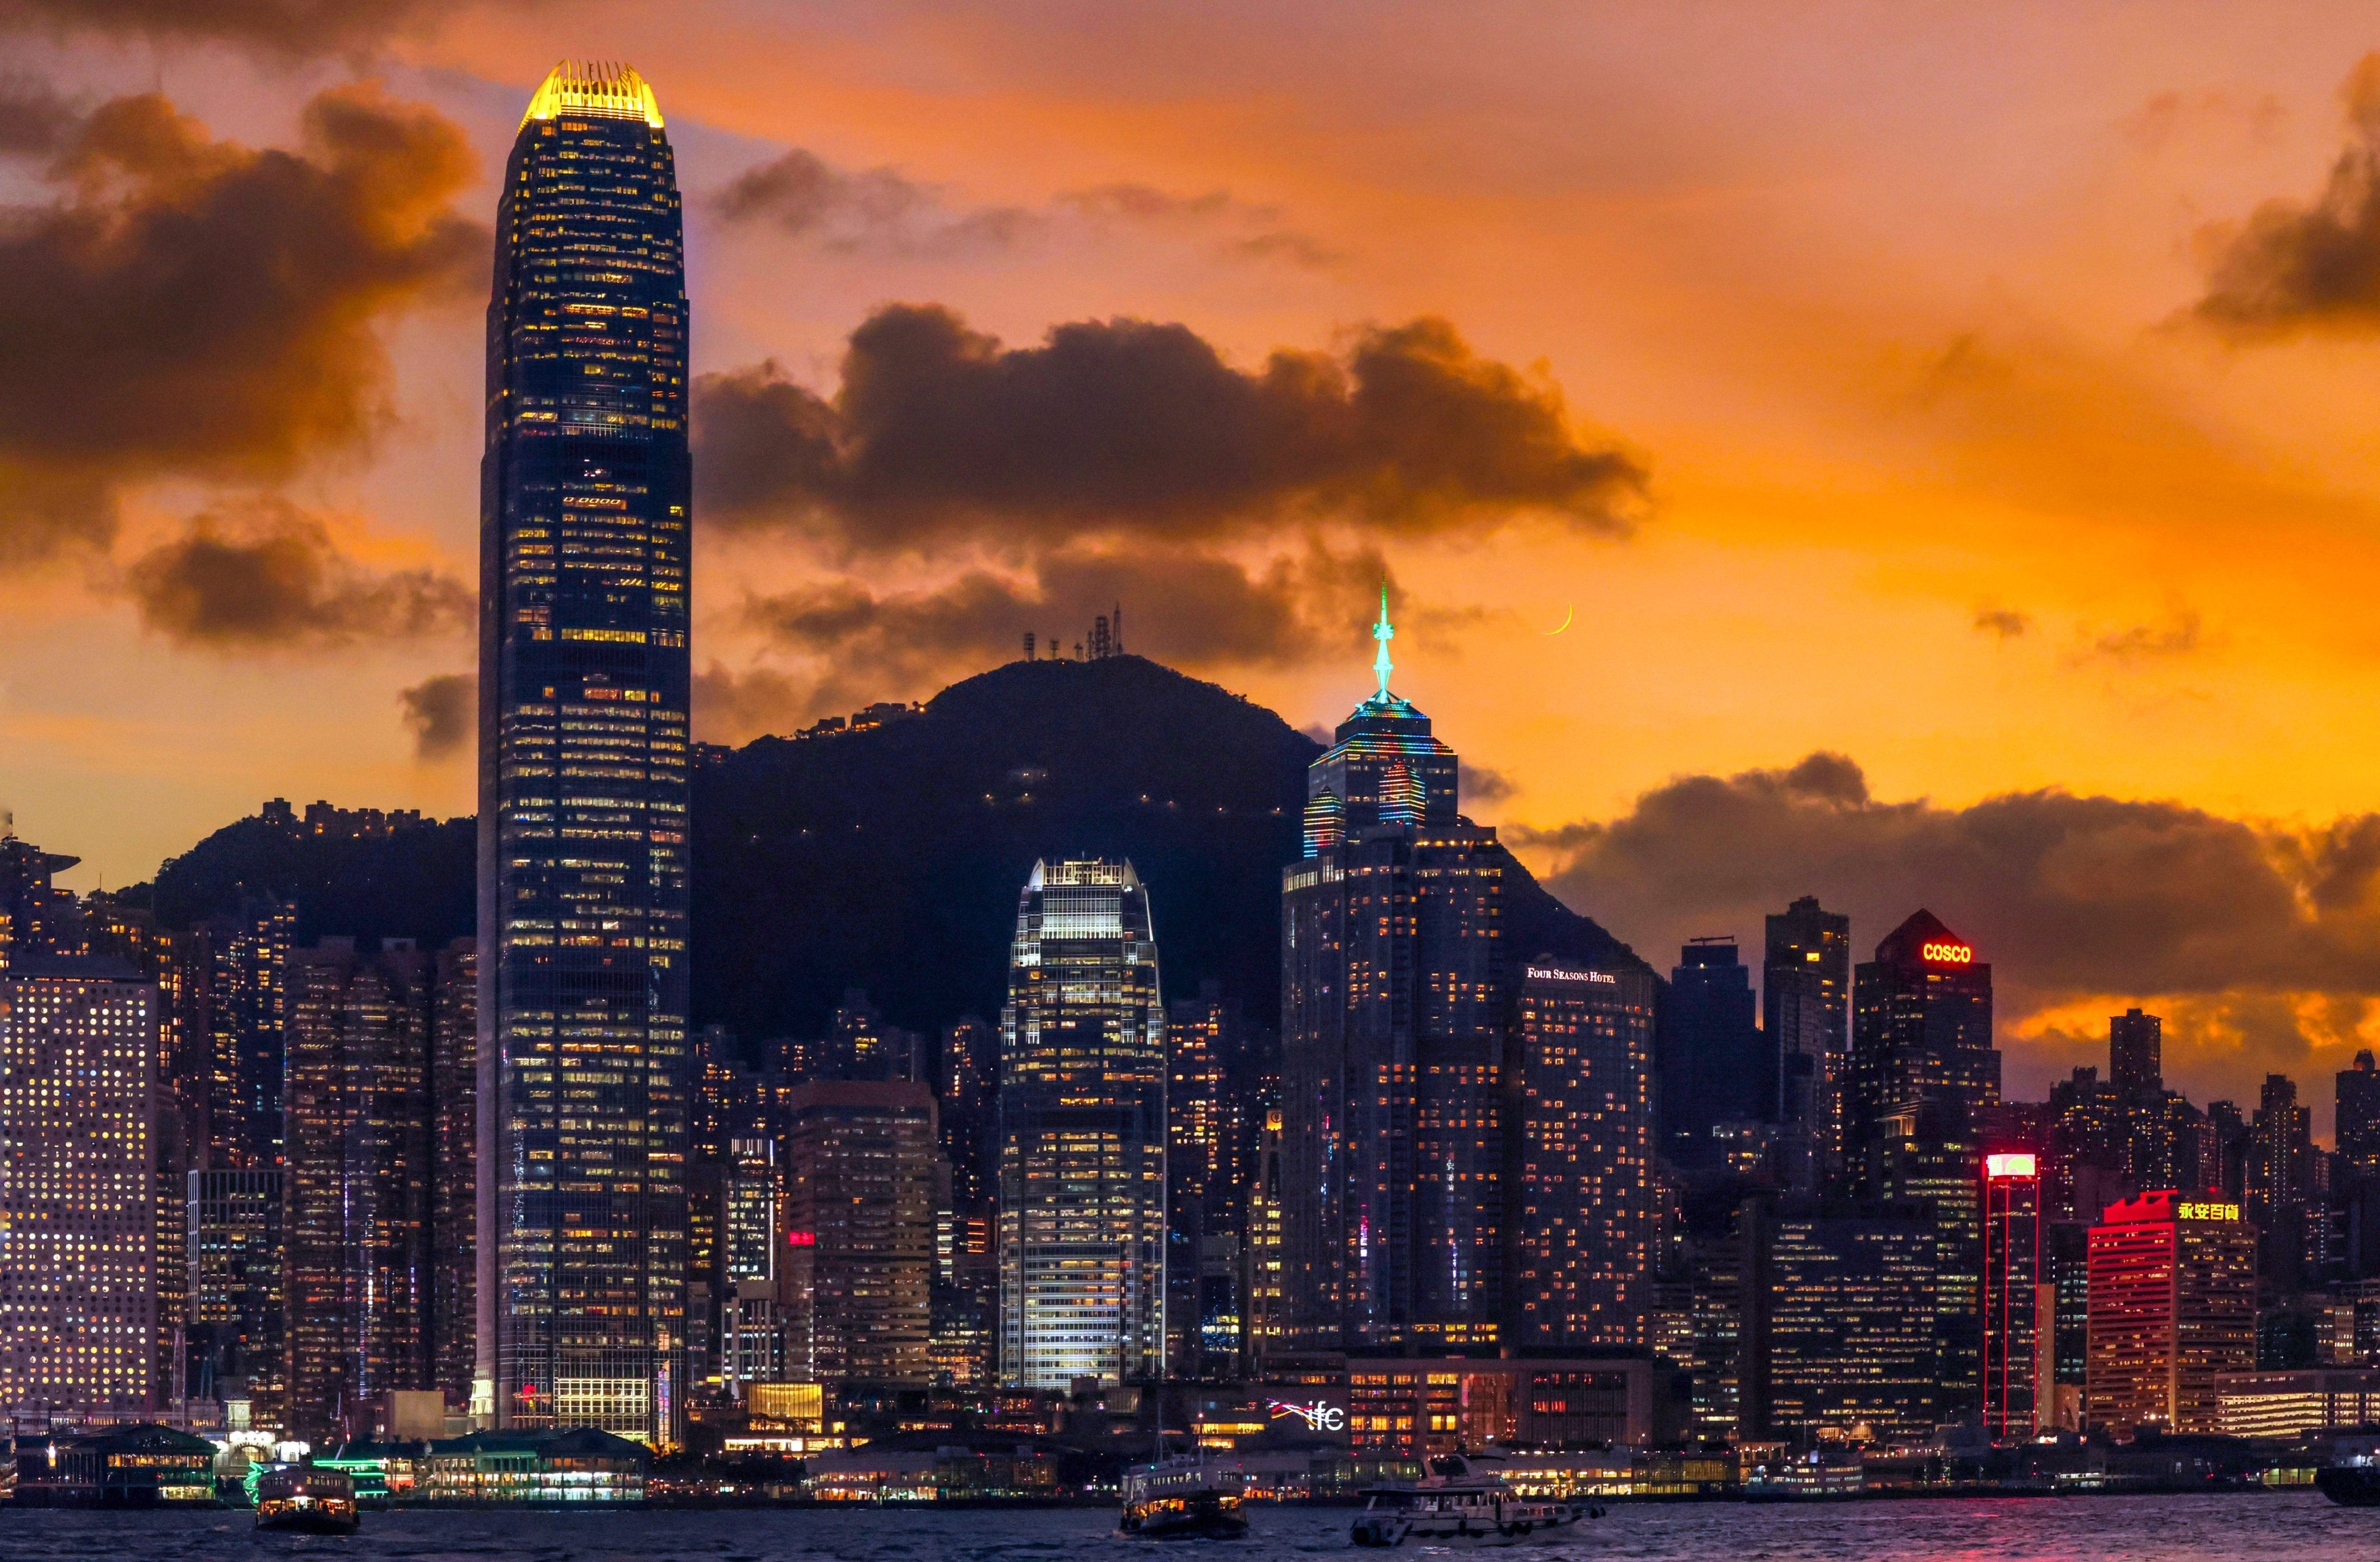 Hong Kong’s Victoria Harbor. The city has logged a deficit almost every financial year since 2019-20, with the shortfall ballooning to HK$101.6 billion this year. Photo: Dickson Lee